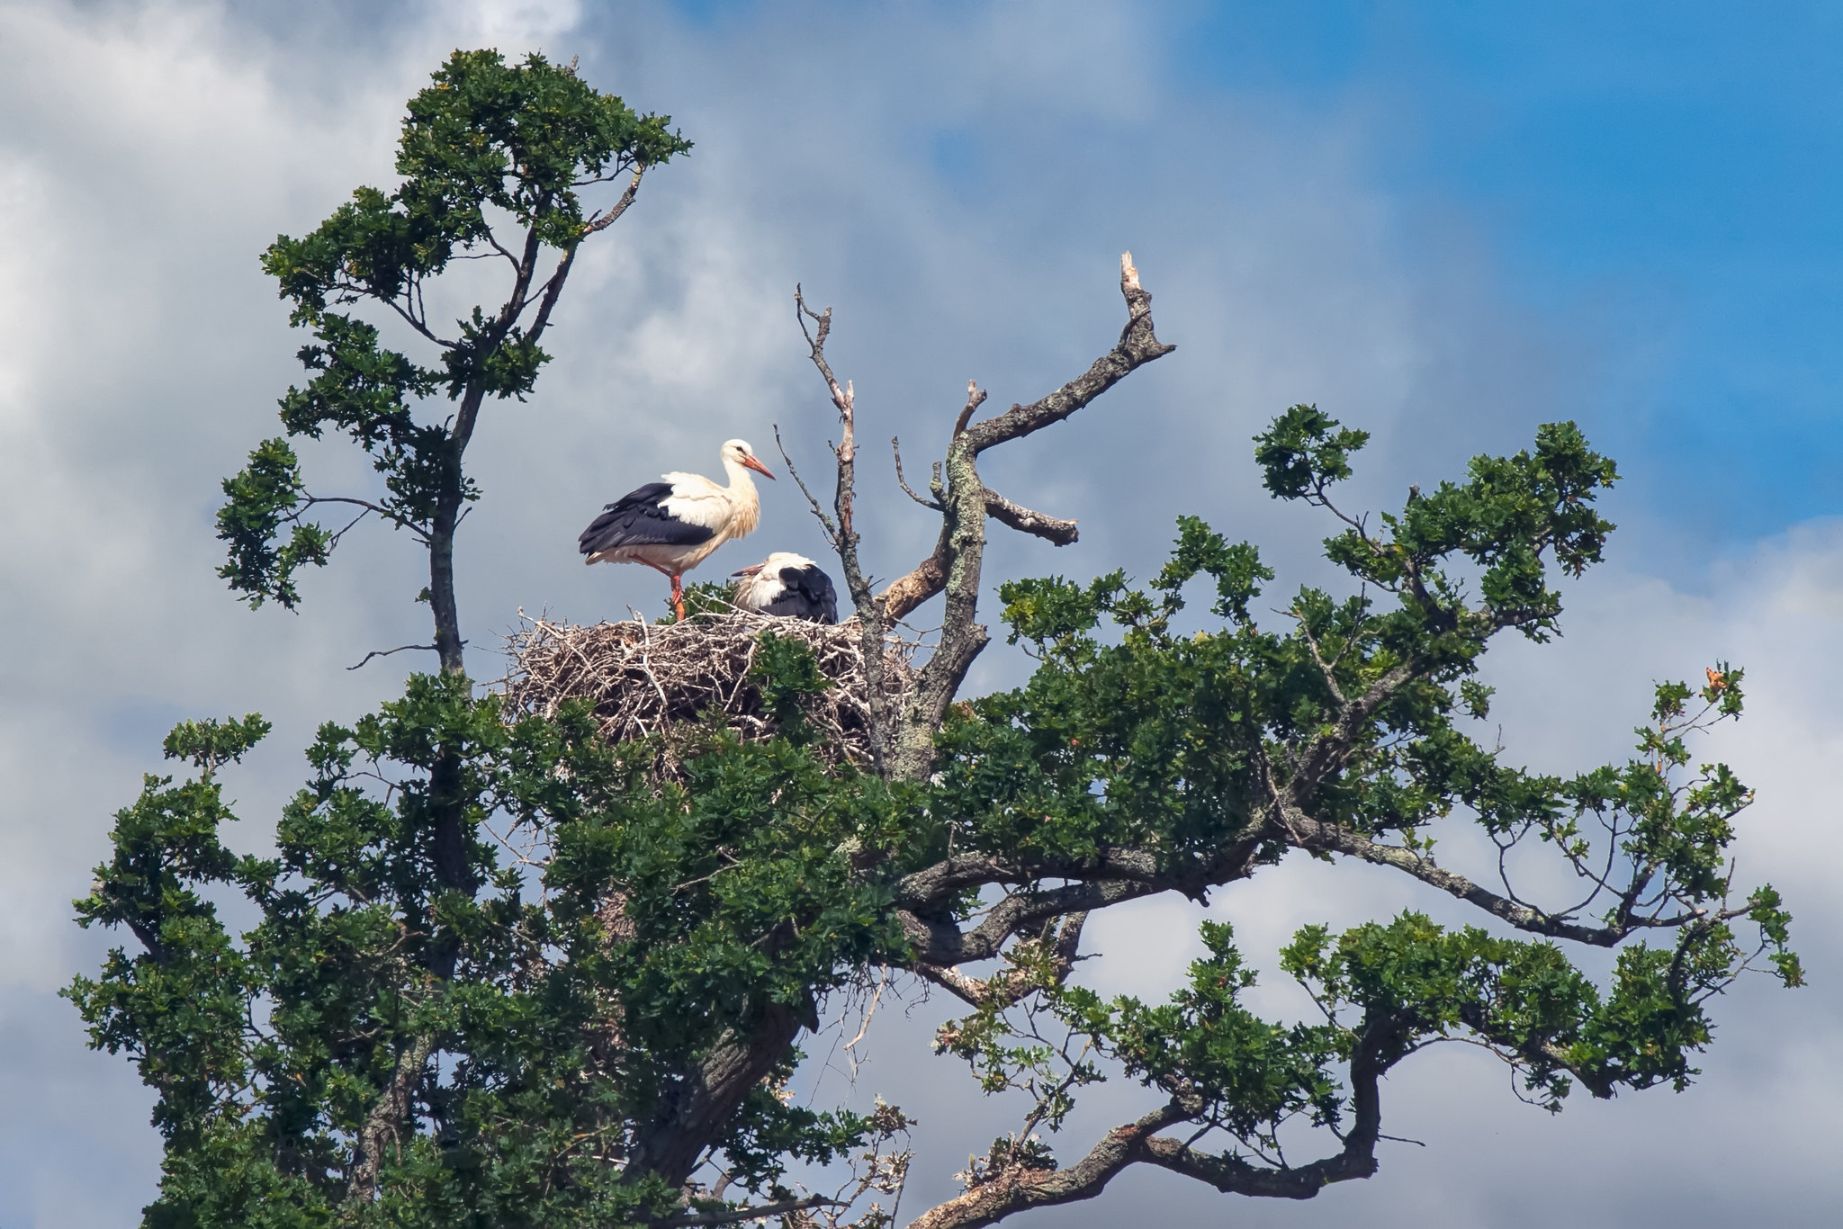 A nest of storks in a tree in Knepp, the first place in the UK that storks have nested after a 600-year absence.